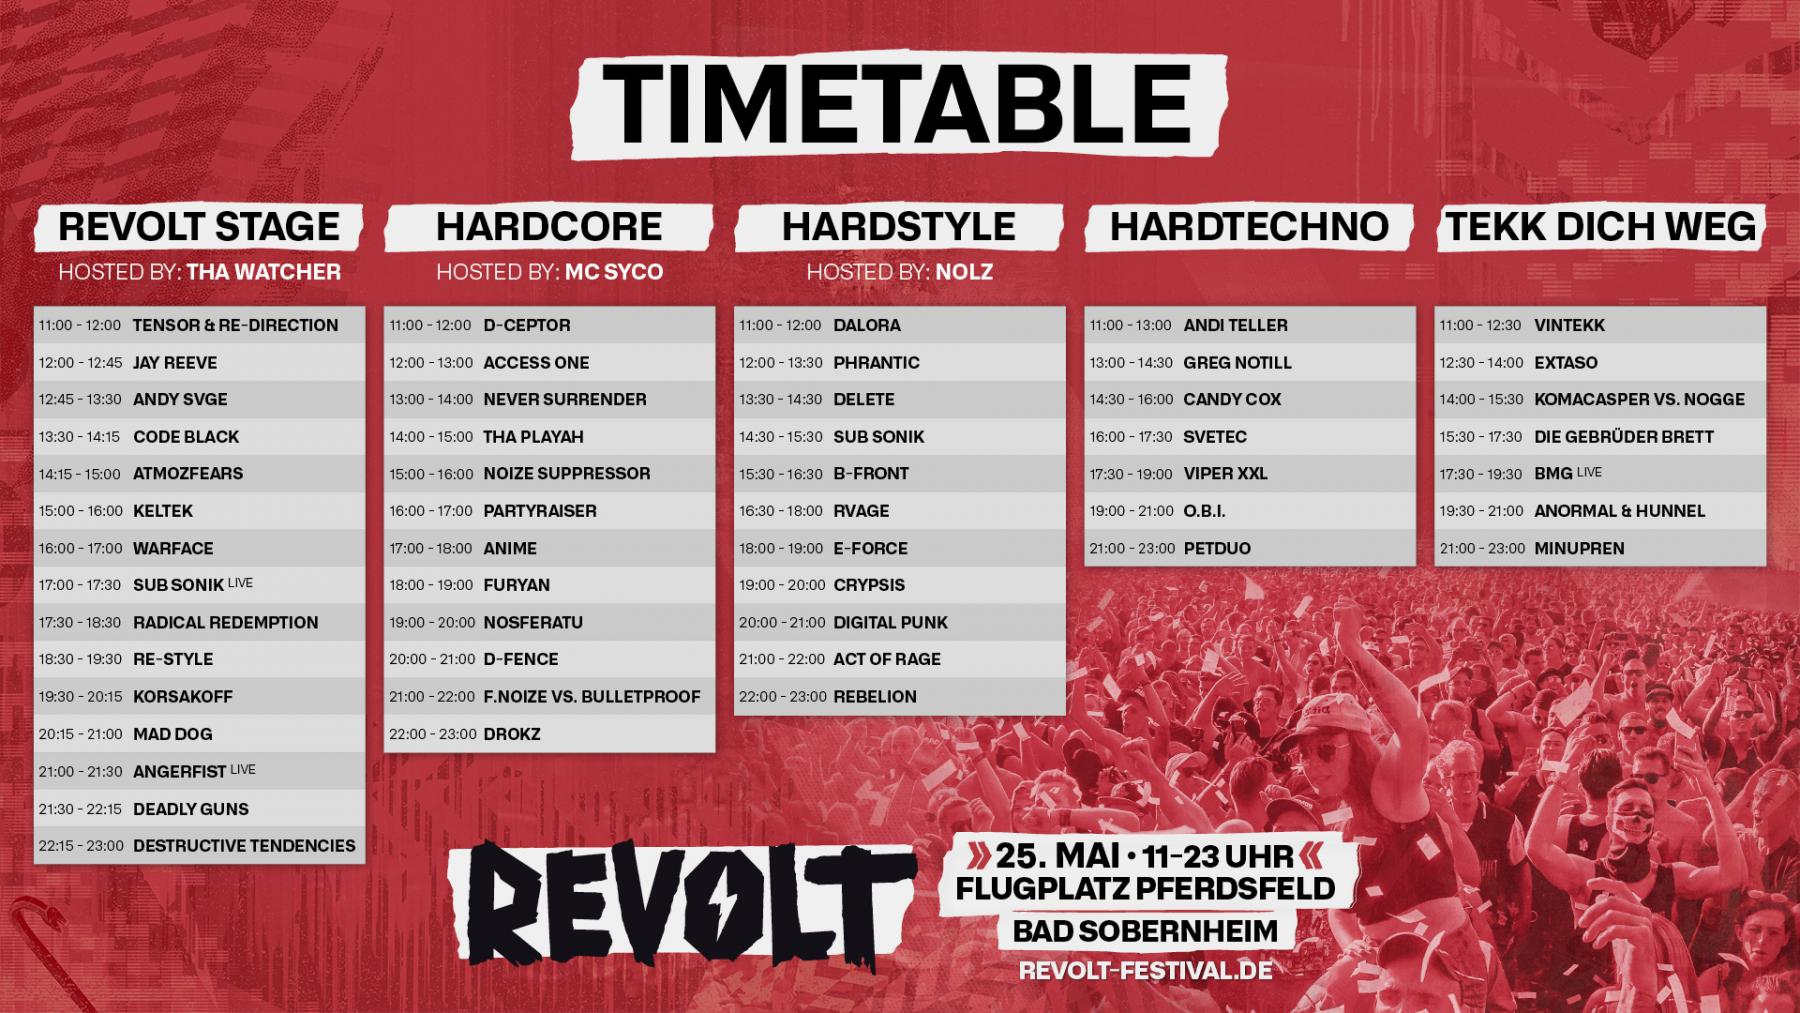  Check out the OFFICIAL TIMETABLE!